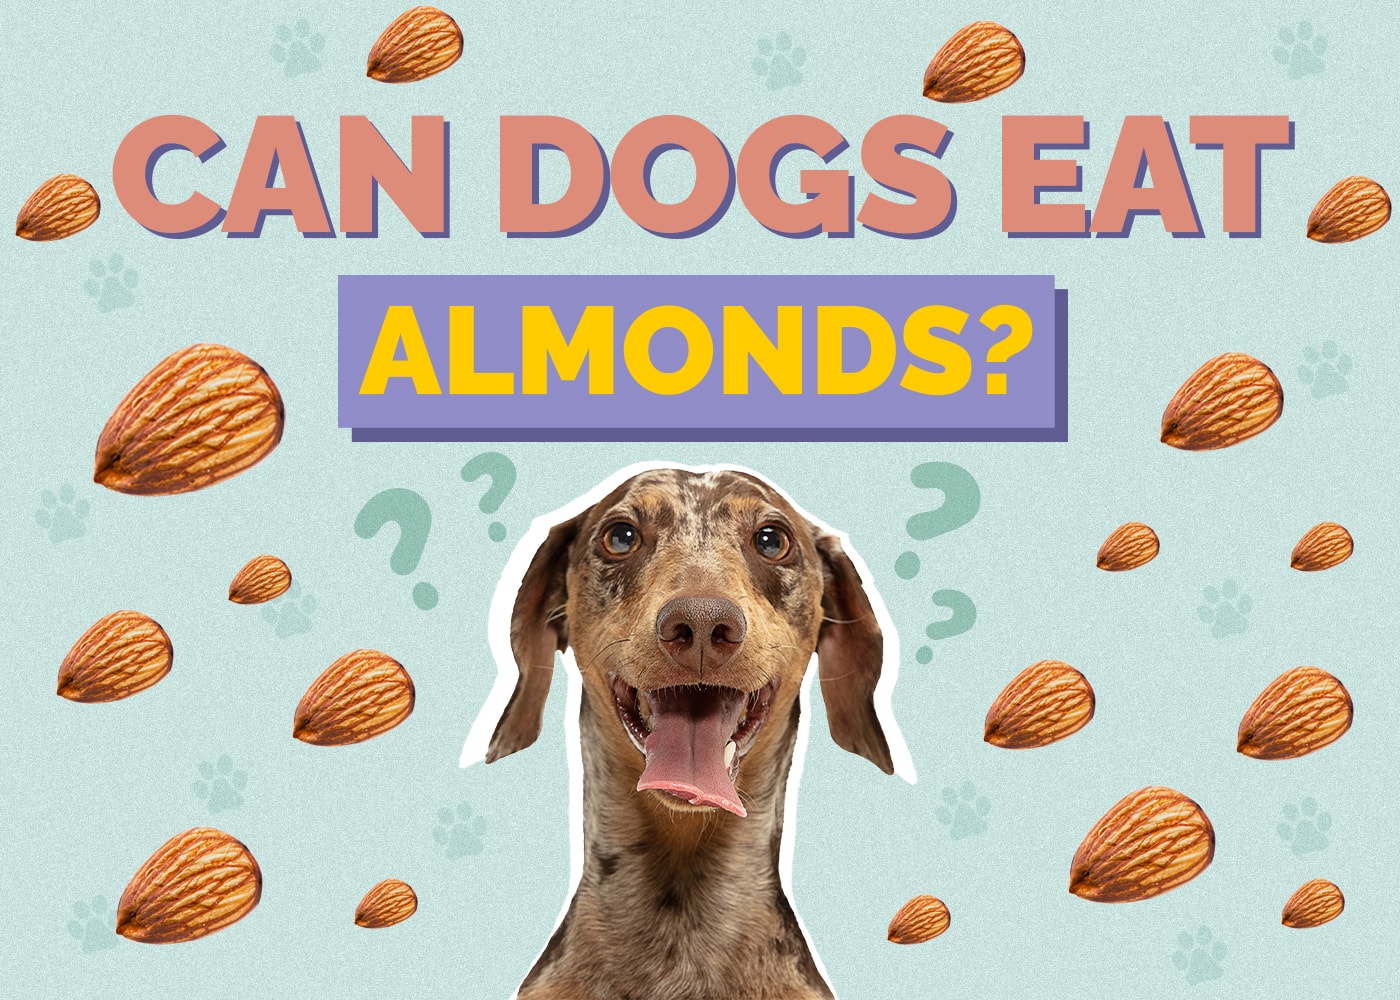 Can Dog Eat almonds